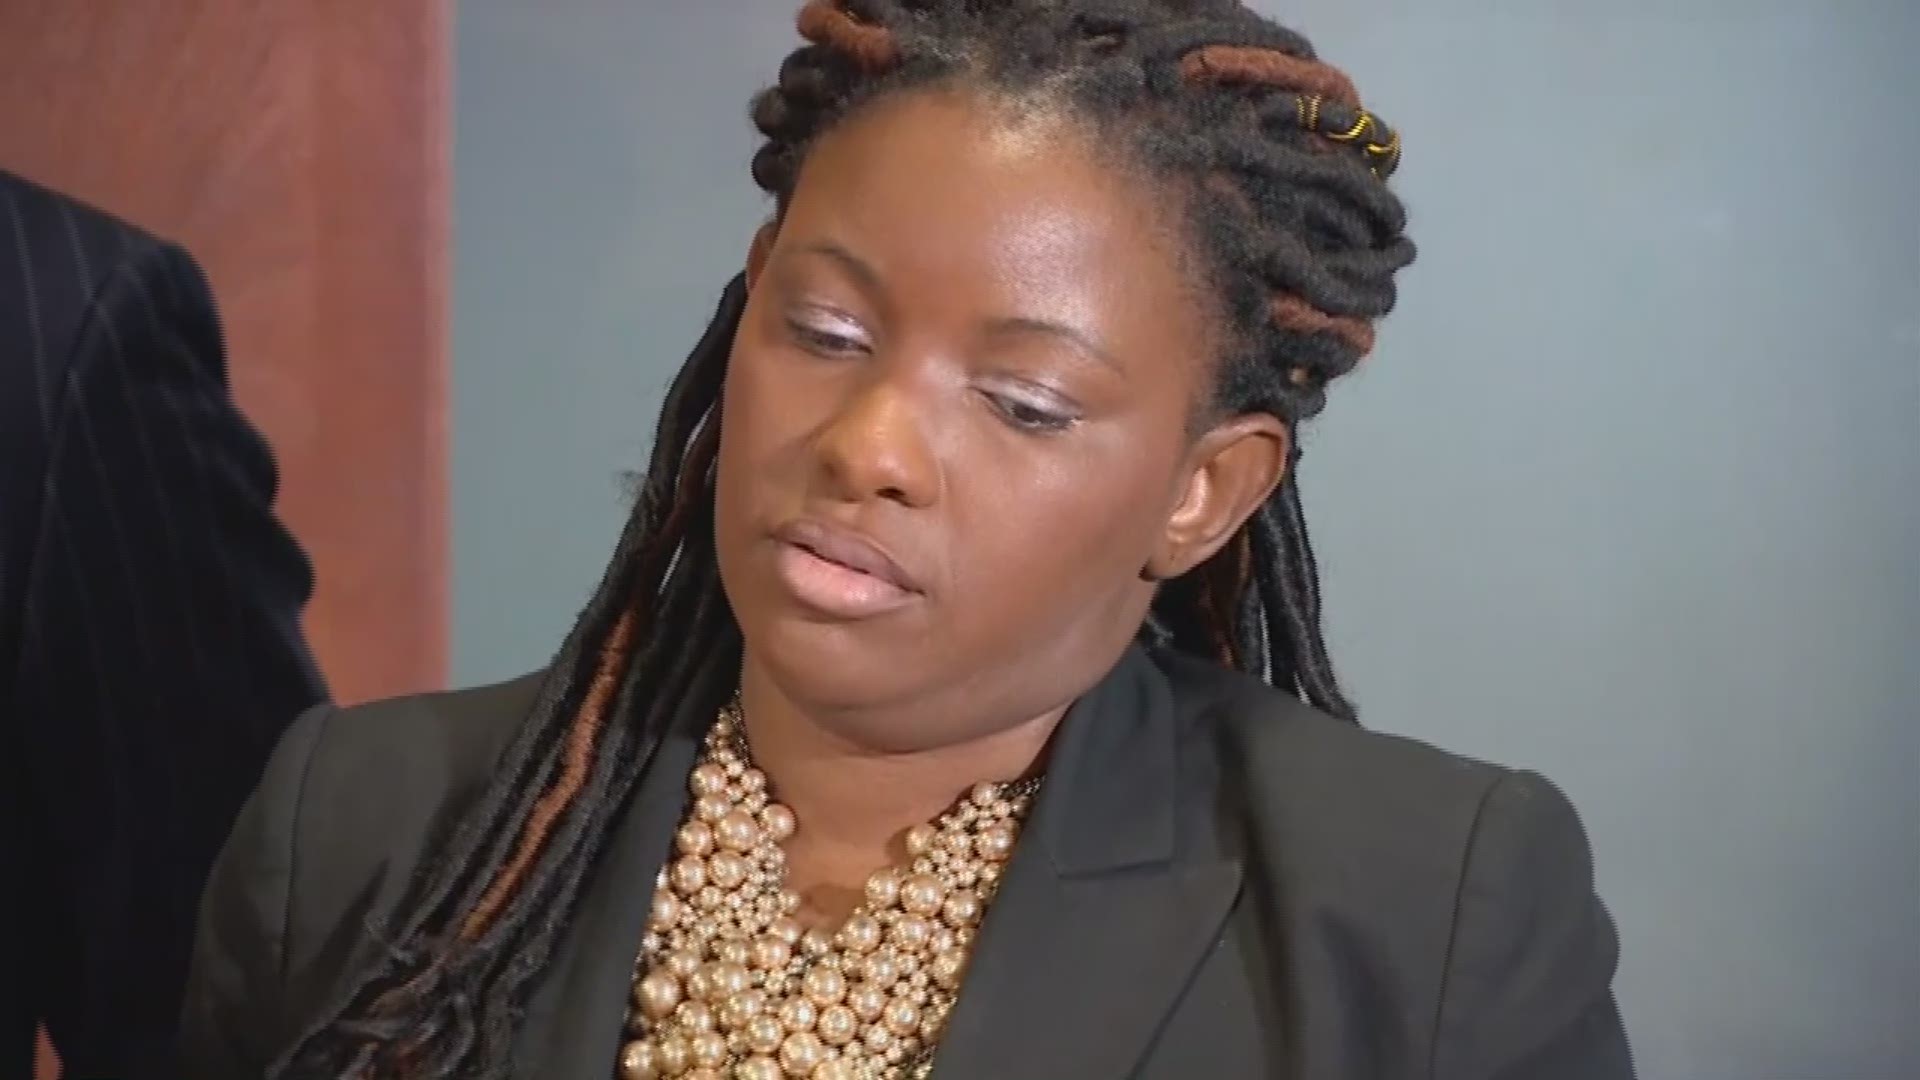 Jordan Edwards family attorney Jasmine Crockett came to the defense of Dallas County DA Faith Johnson after she faced criticism over the 15-year prison sentence for Roy Oliver.